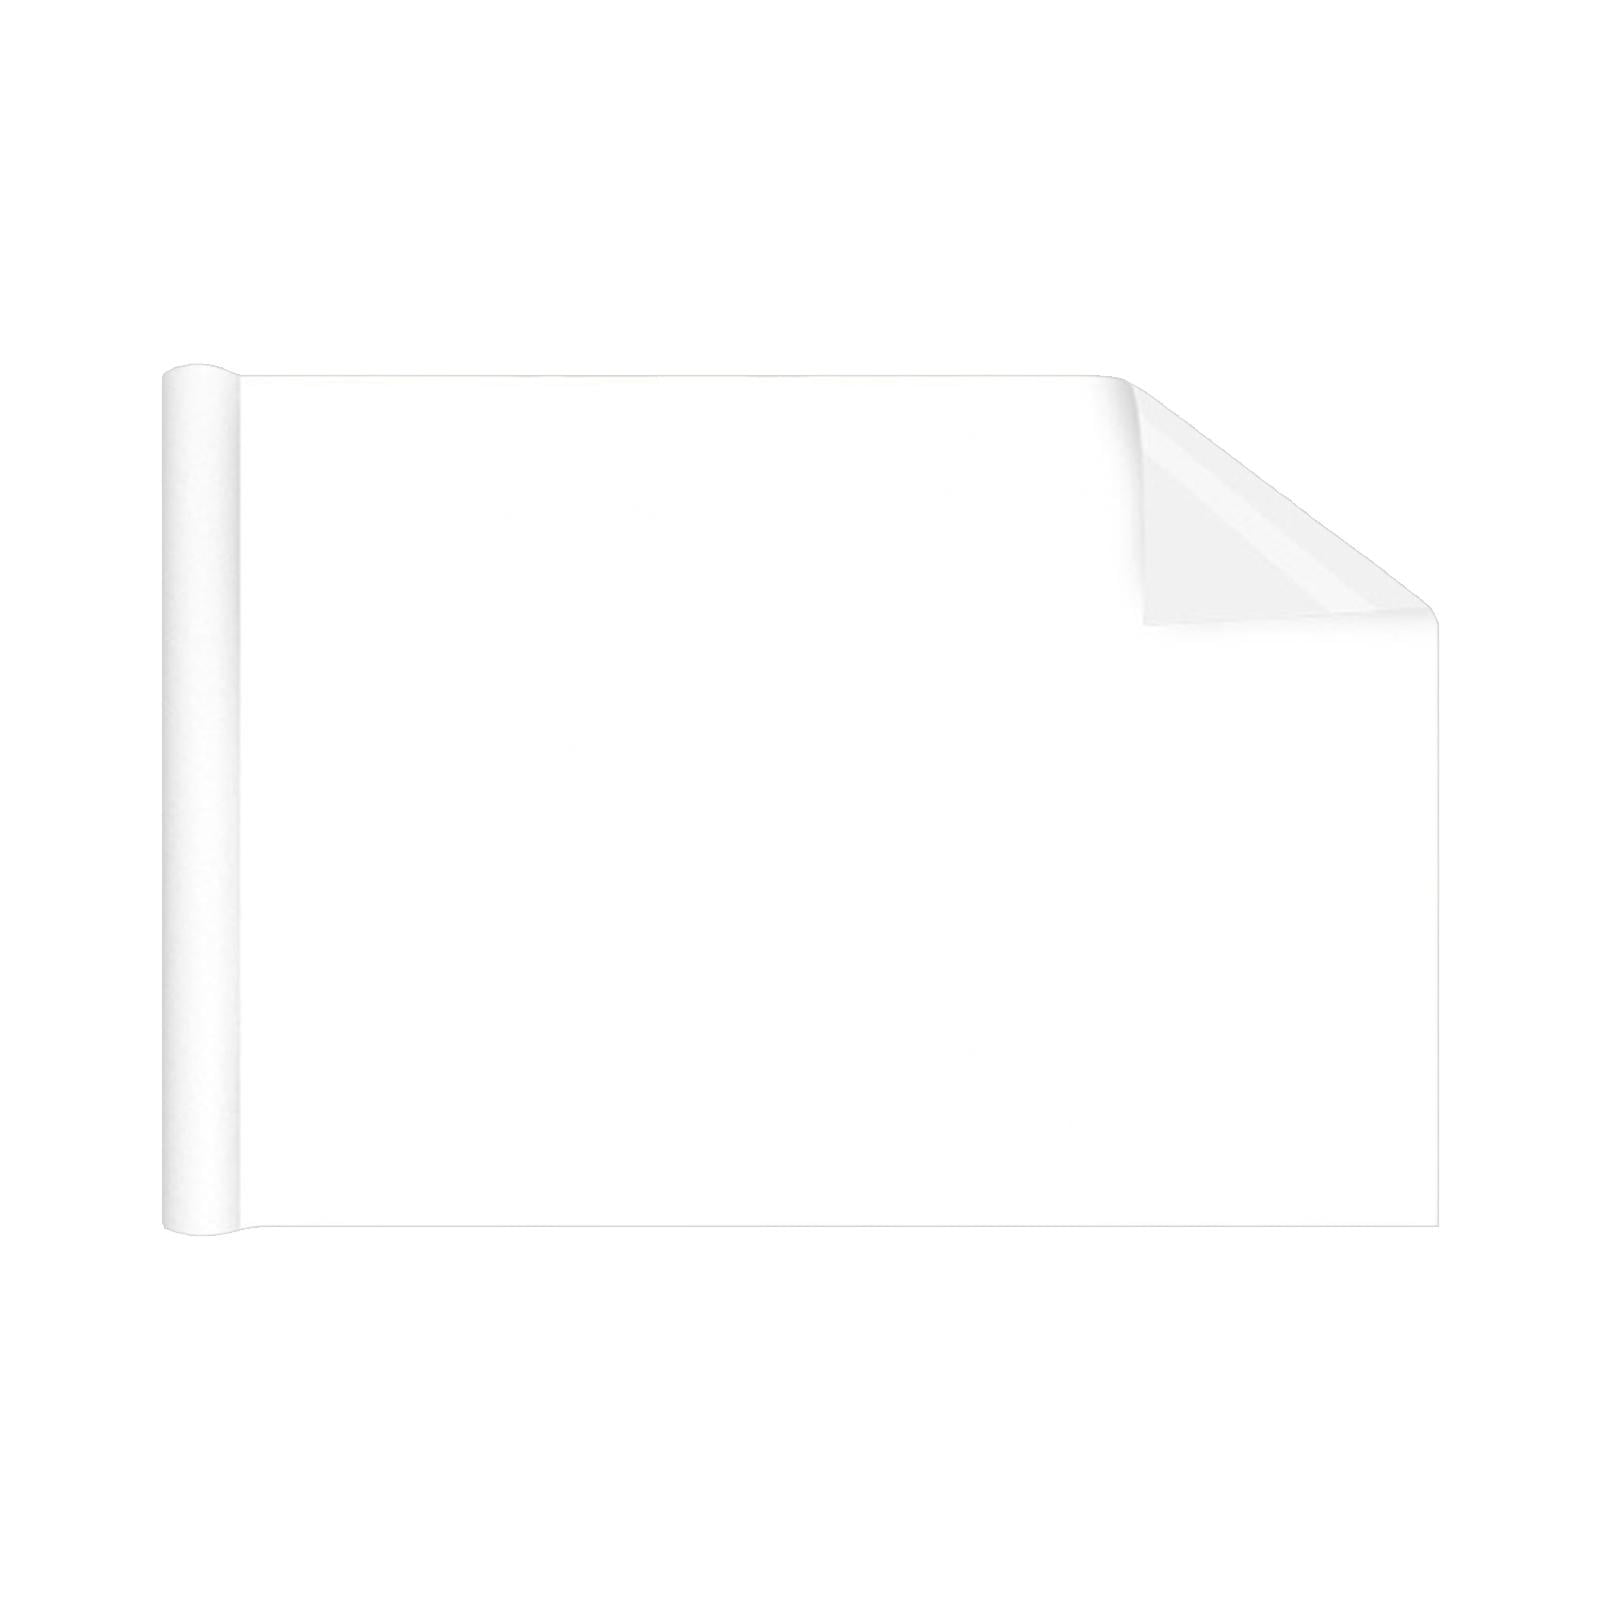 Foam Core Backing Board 3/16 White 24x36- 5 Pack. Many Sizes Available.  Acid Free Buffered Craft Poster Board for Signs, Presentations, School,  Office and Art Projects 